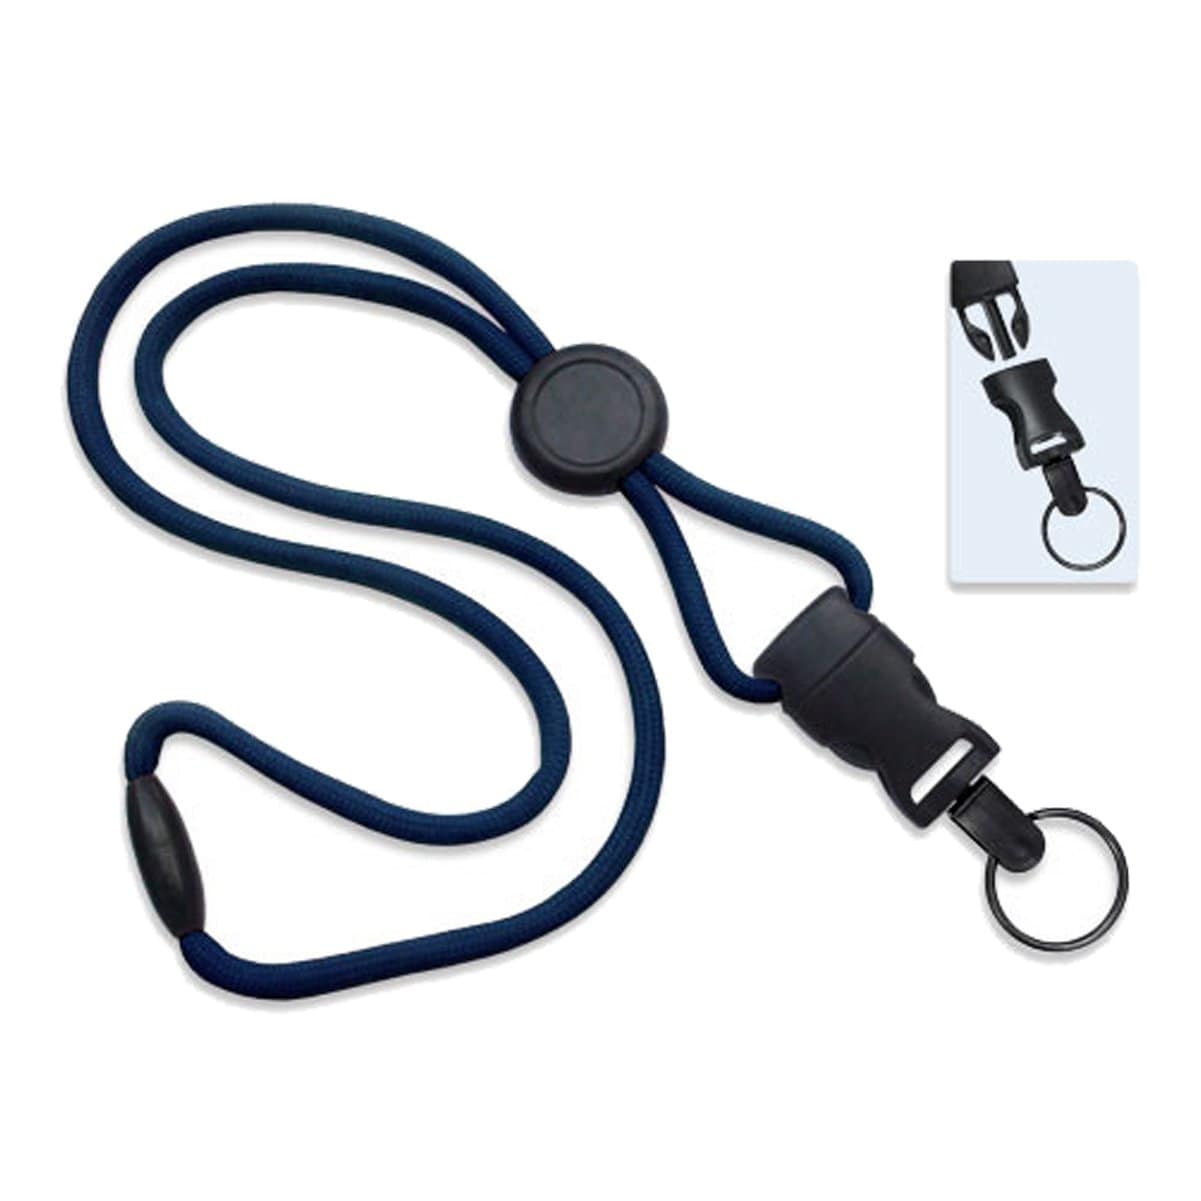 A Breakaway Lanyard with Round Slider And Detachable Key Ring 2135-461X with an attached black buckle and keyring. An inset shows a close-up of the buckle mechanism, highlighting its safety features.